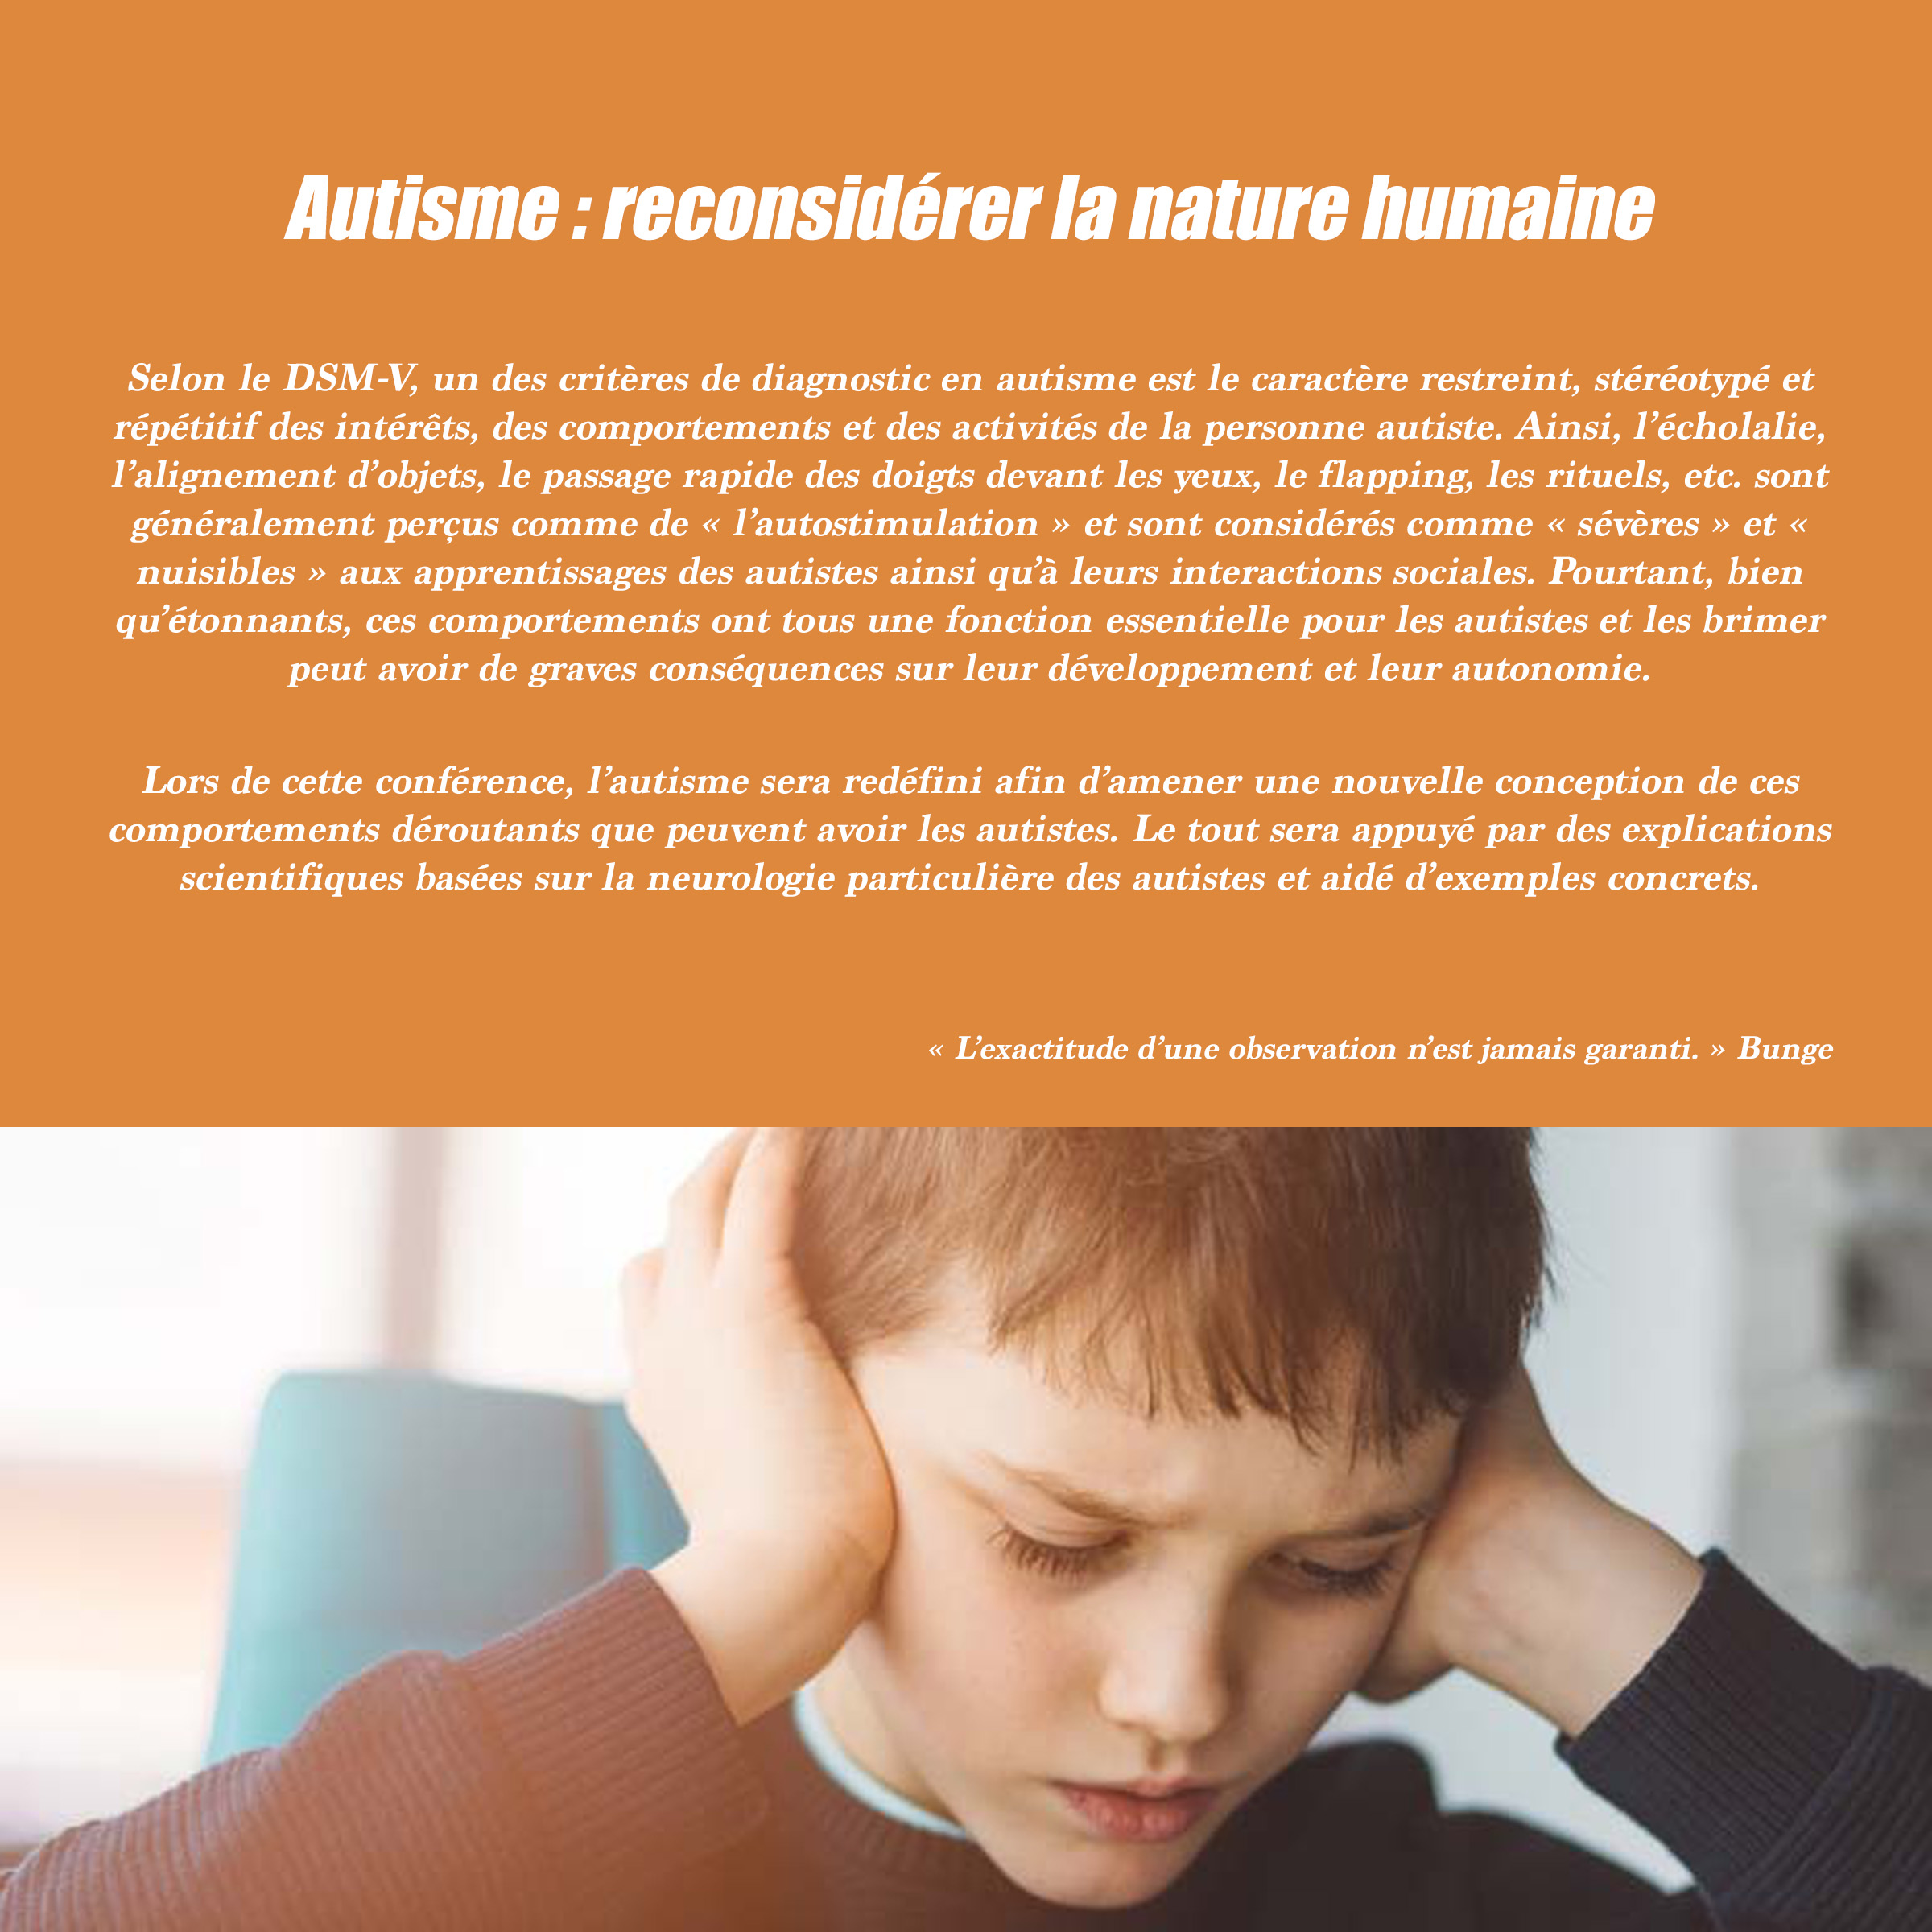 Conference_reconsiderer_nature_humaine